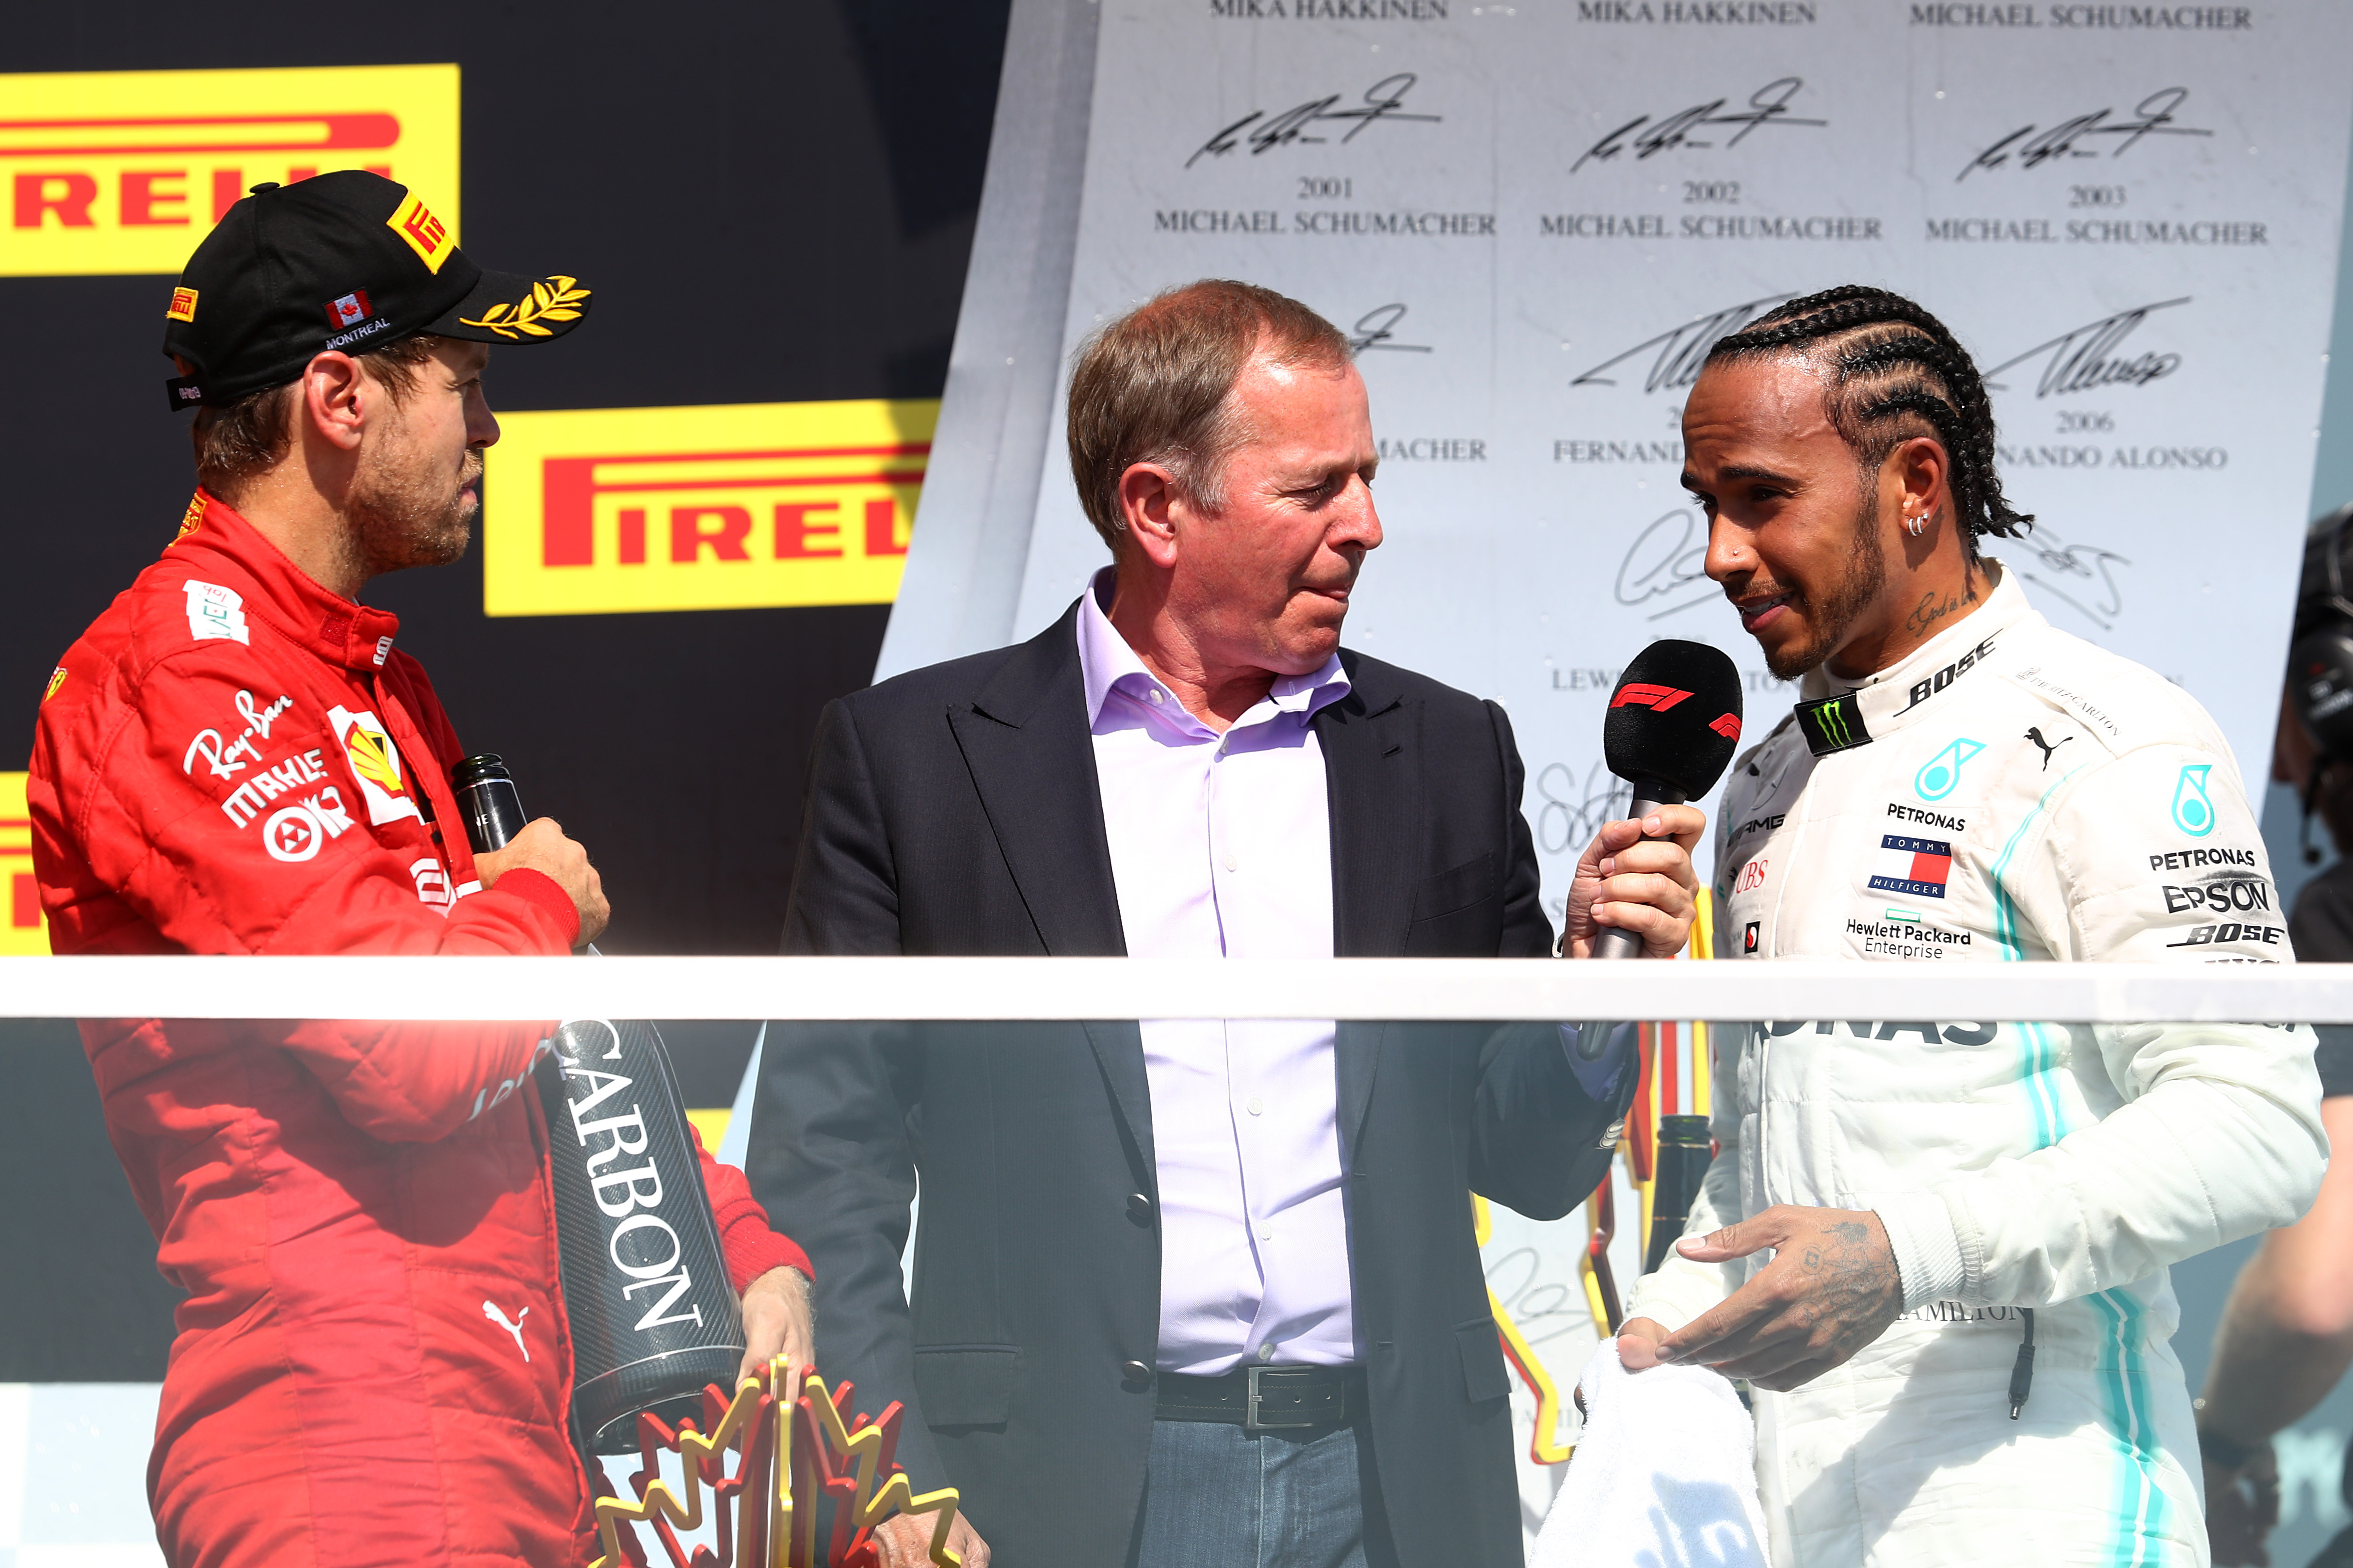 Martin Brundle issues completely brutal response to Lewis Hamilton's comments about final season with Mercedes